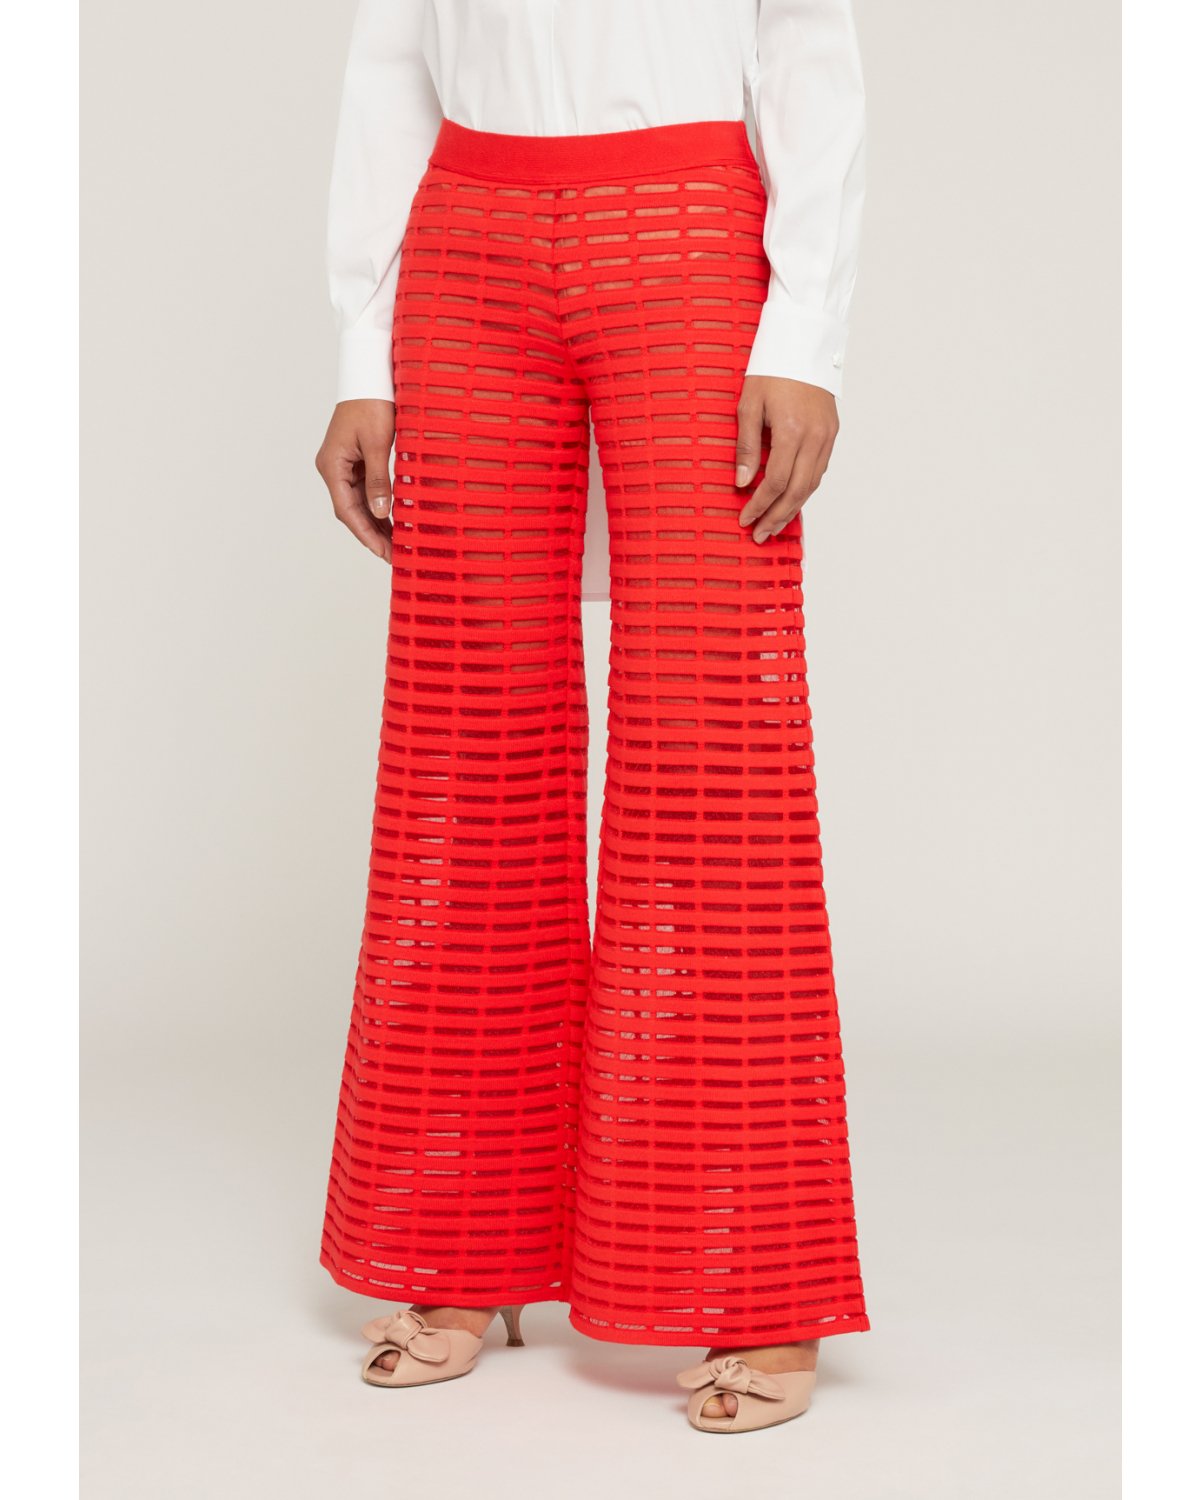 Red open-knit pants | Iconic Capsule Collection, 73_74 | Genny